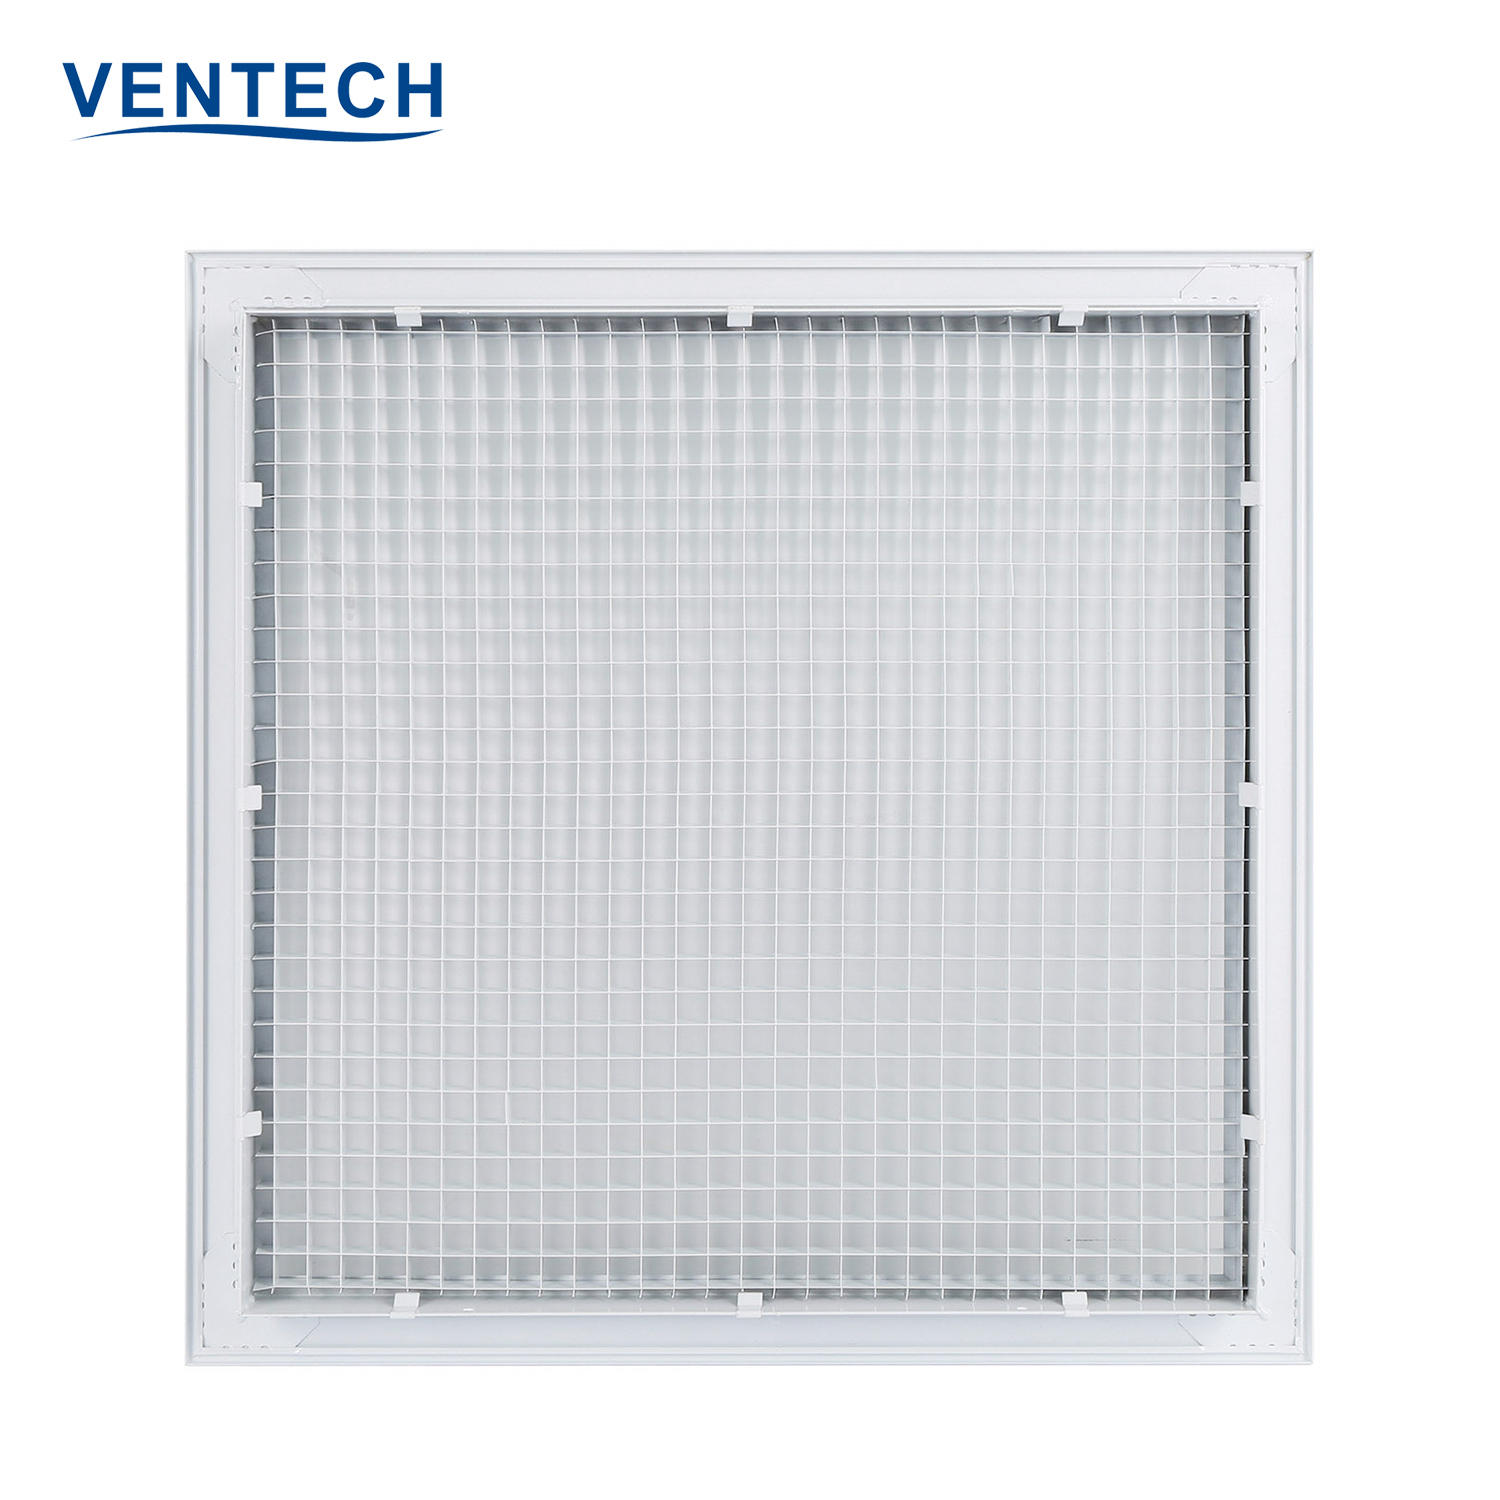 Hvac System Mill Finish Aluminum Egg Crate Core Ceiling Lighting Eggcrate Sheet For Air Conditioning